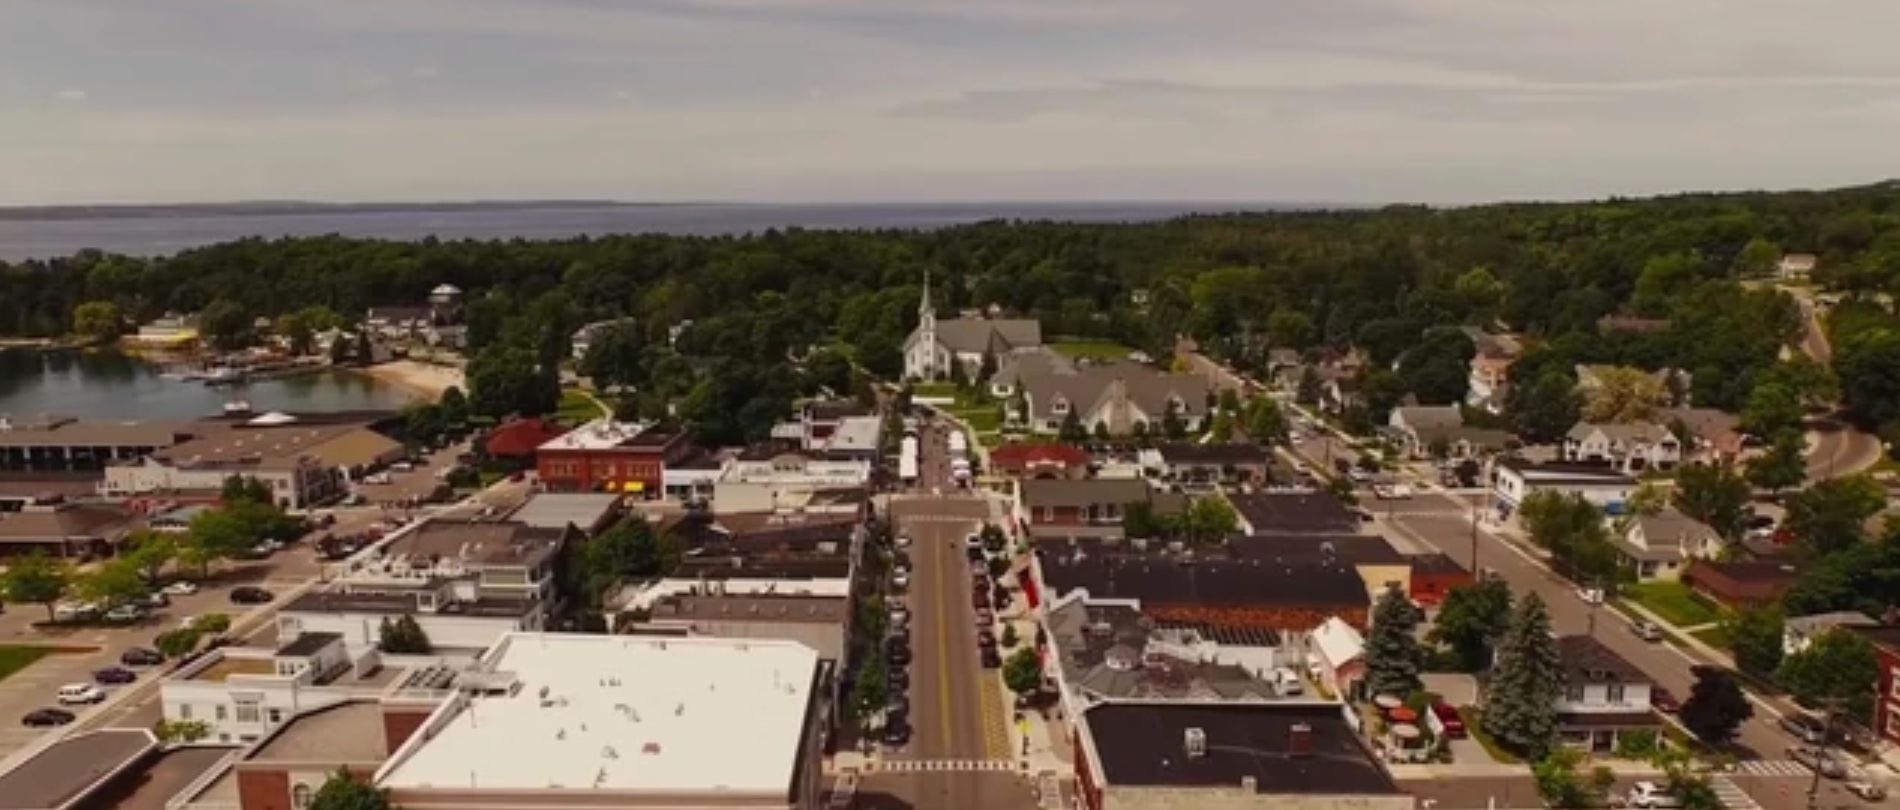 Riverdale Aerial Shot Used in Gilmore Girls and Pretty Little Liars